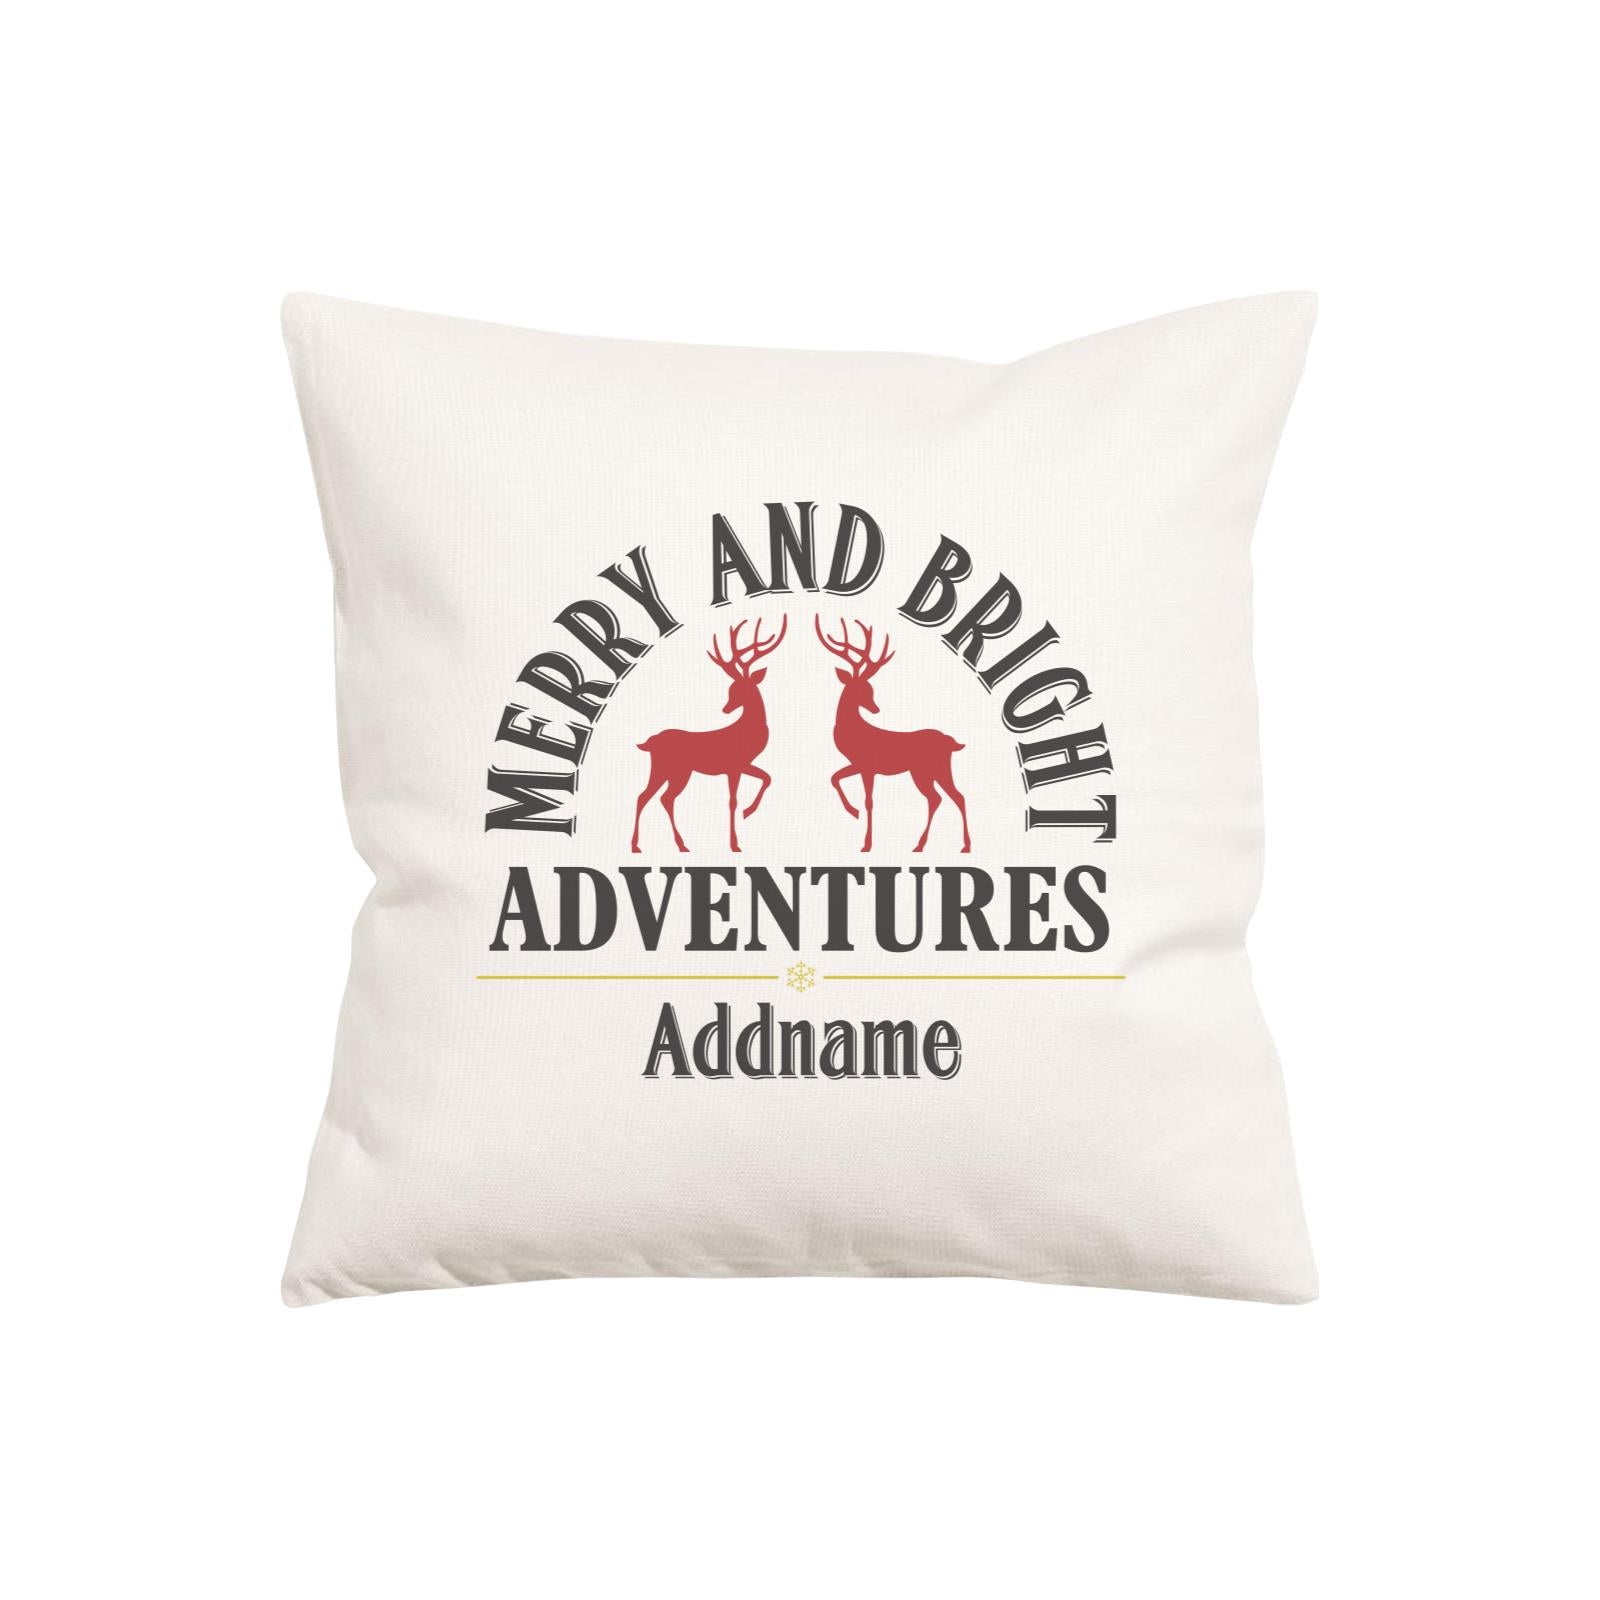 Xmas Merry and Bright Adventures with Reindeers Pillow Pillow Cushion